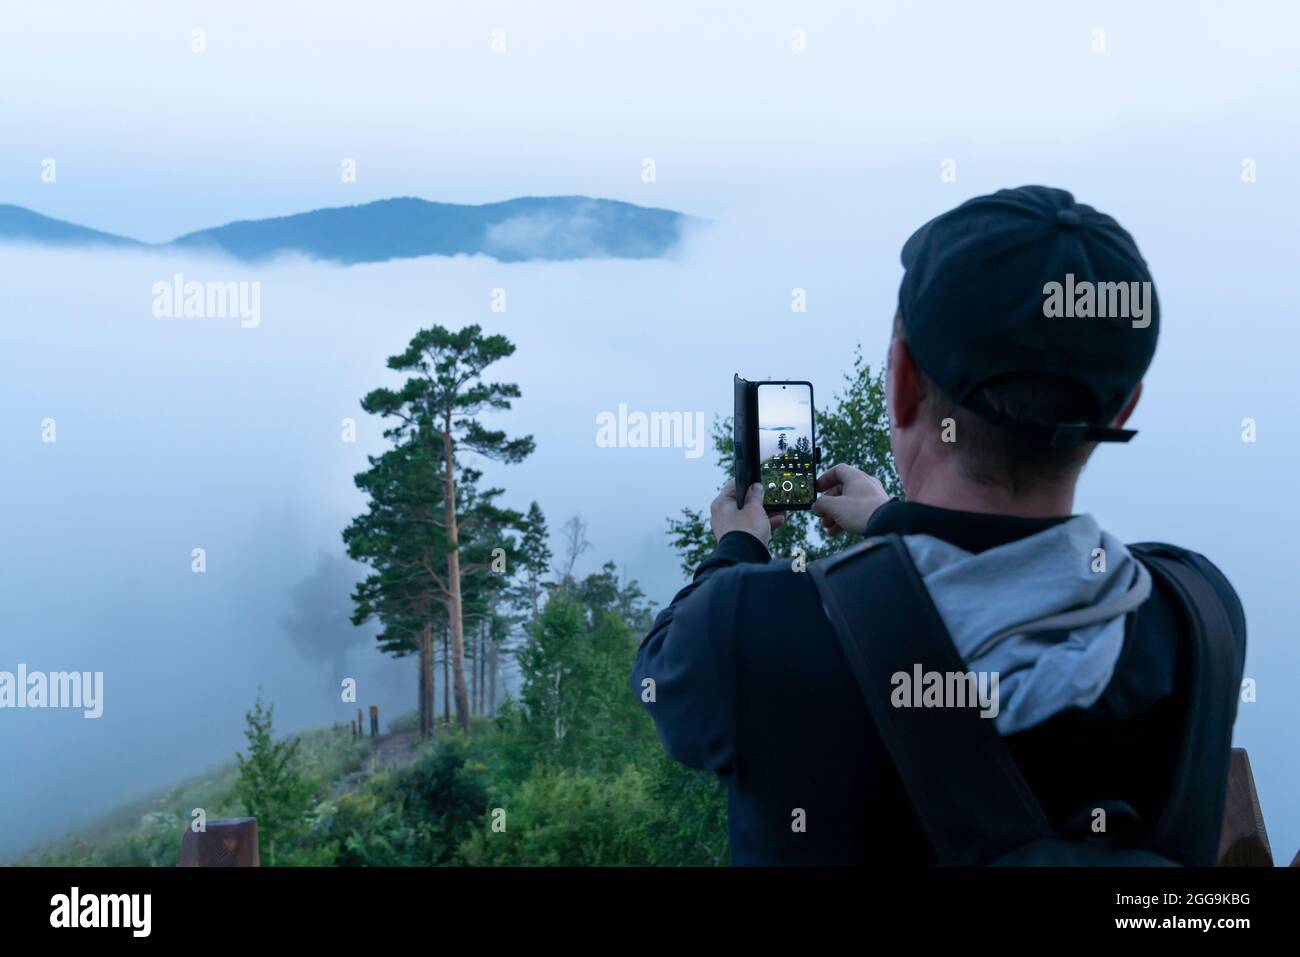 a male tourist in a cap takes photos of the morning uman and his journey on his mobile phone. early morning in the gloomy dramatic forest. Stock Photo